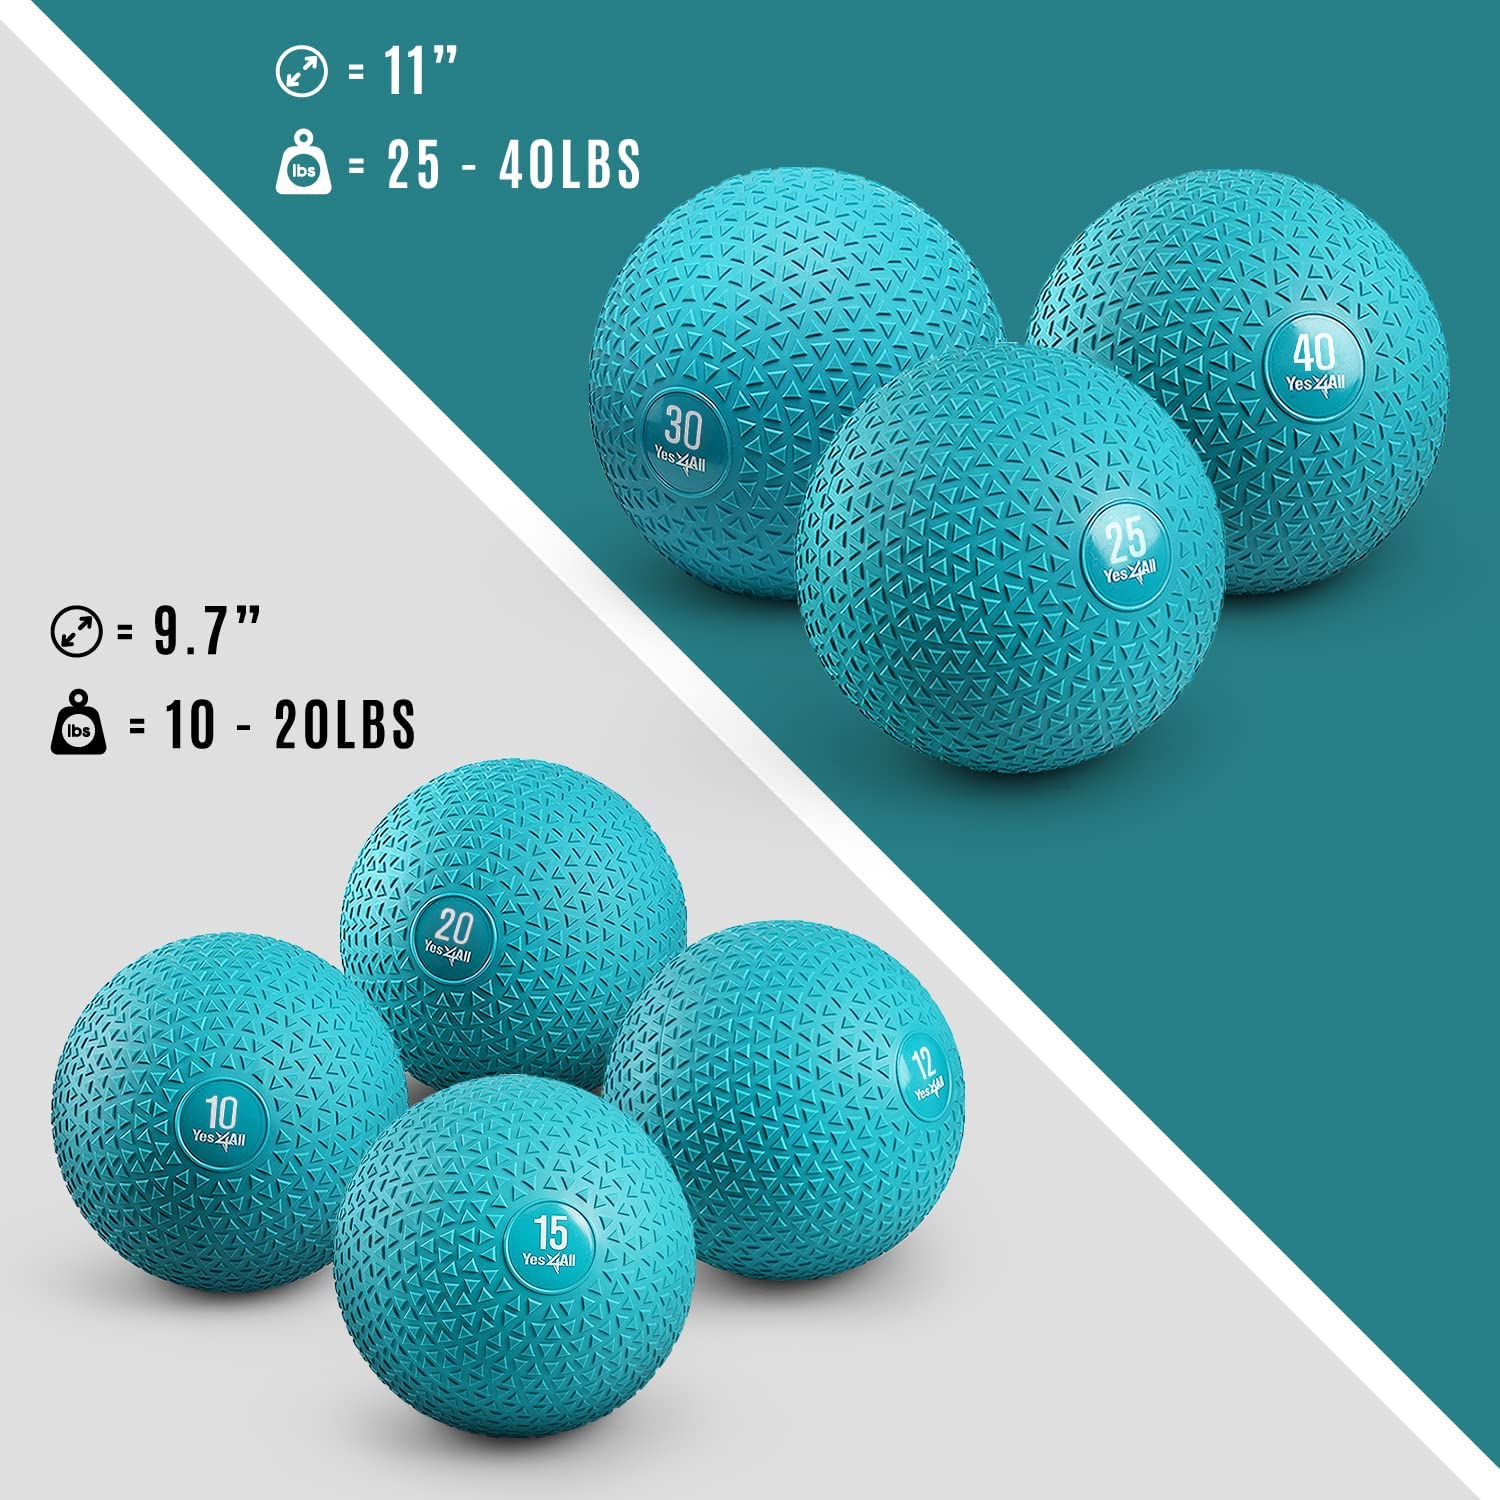 Yes4All 10lbs Slam Medicine Ball Triangle Teal - image 3 of 8